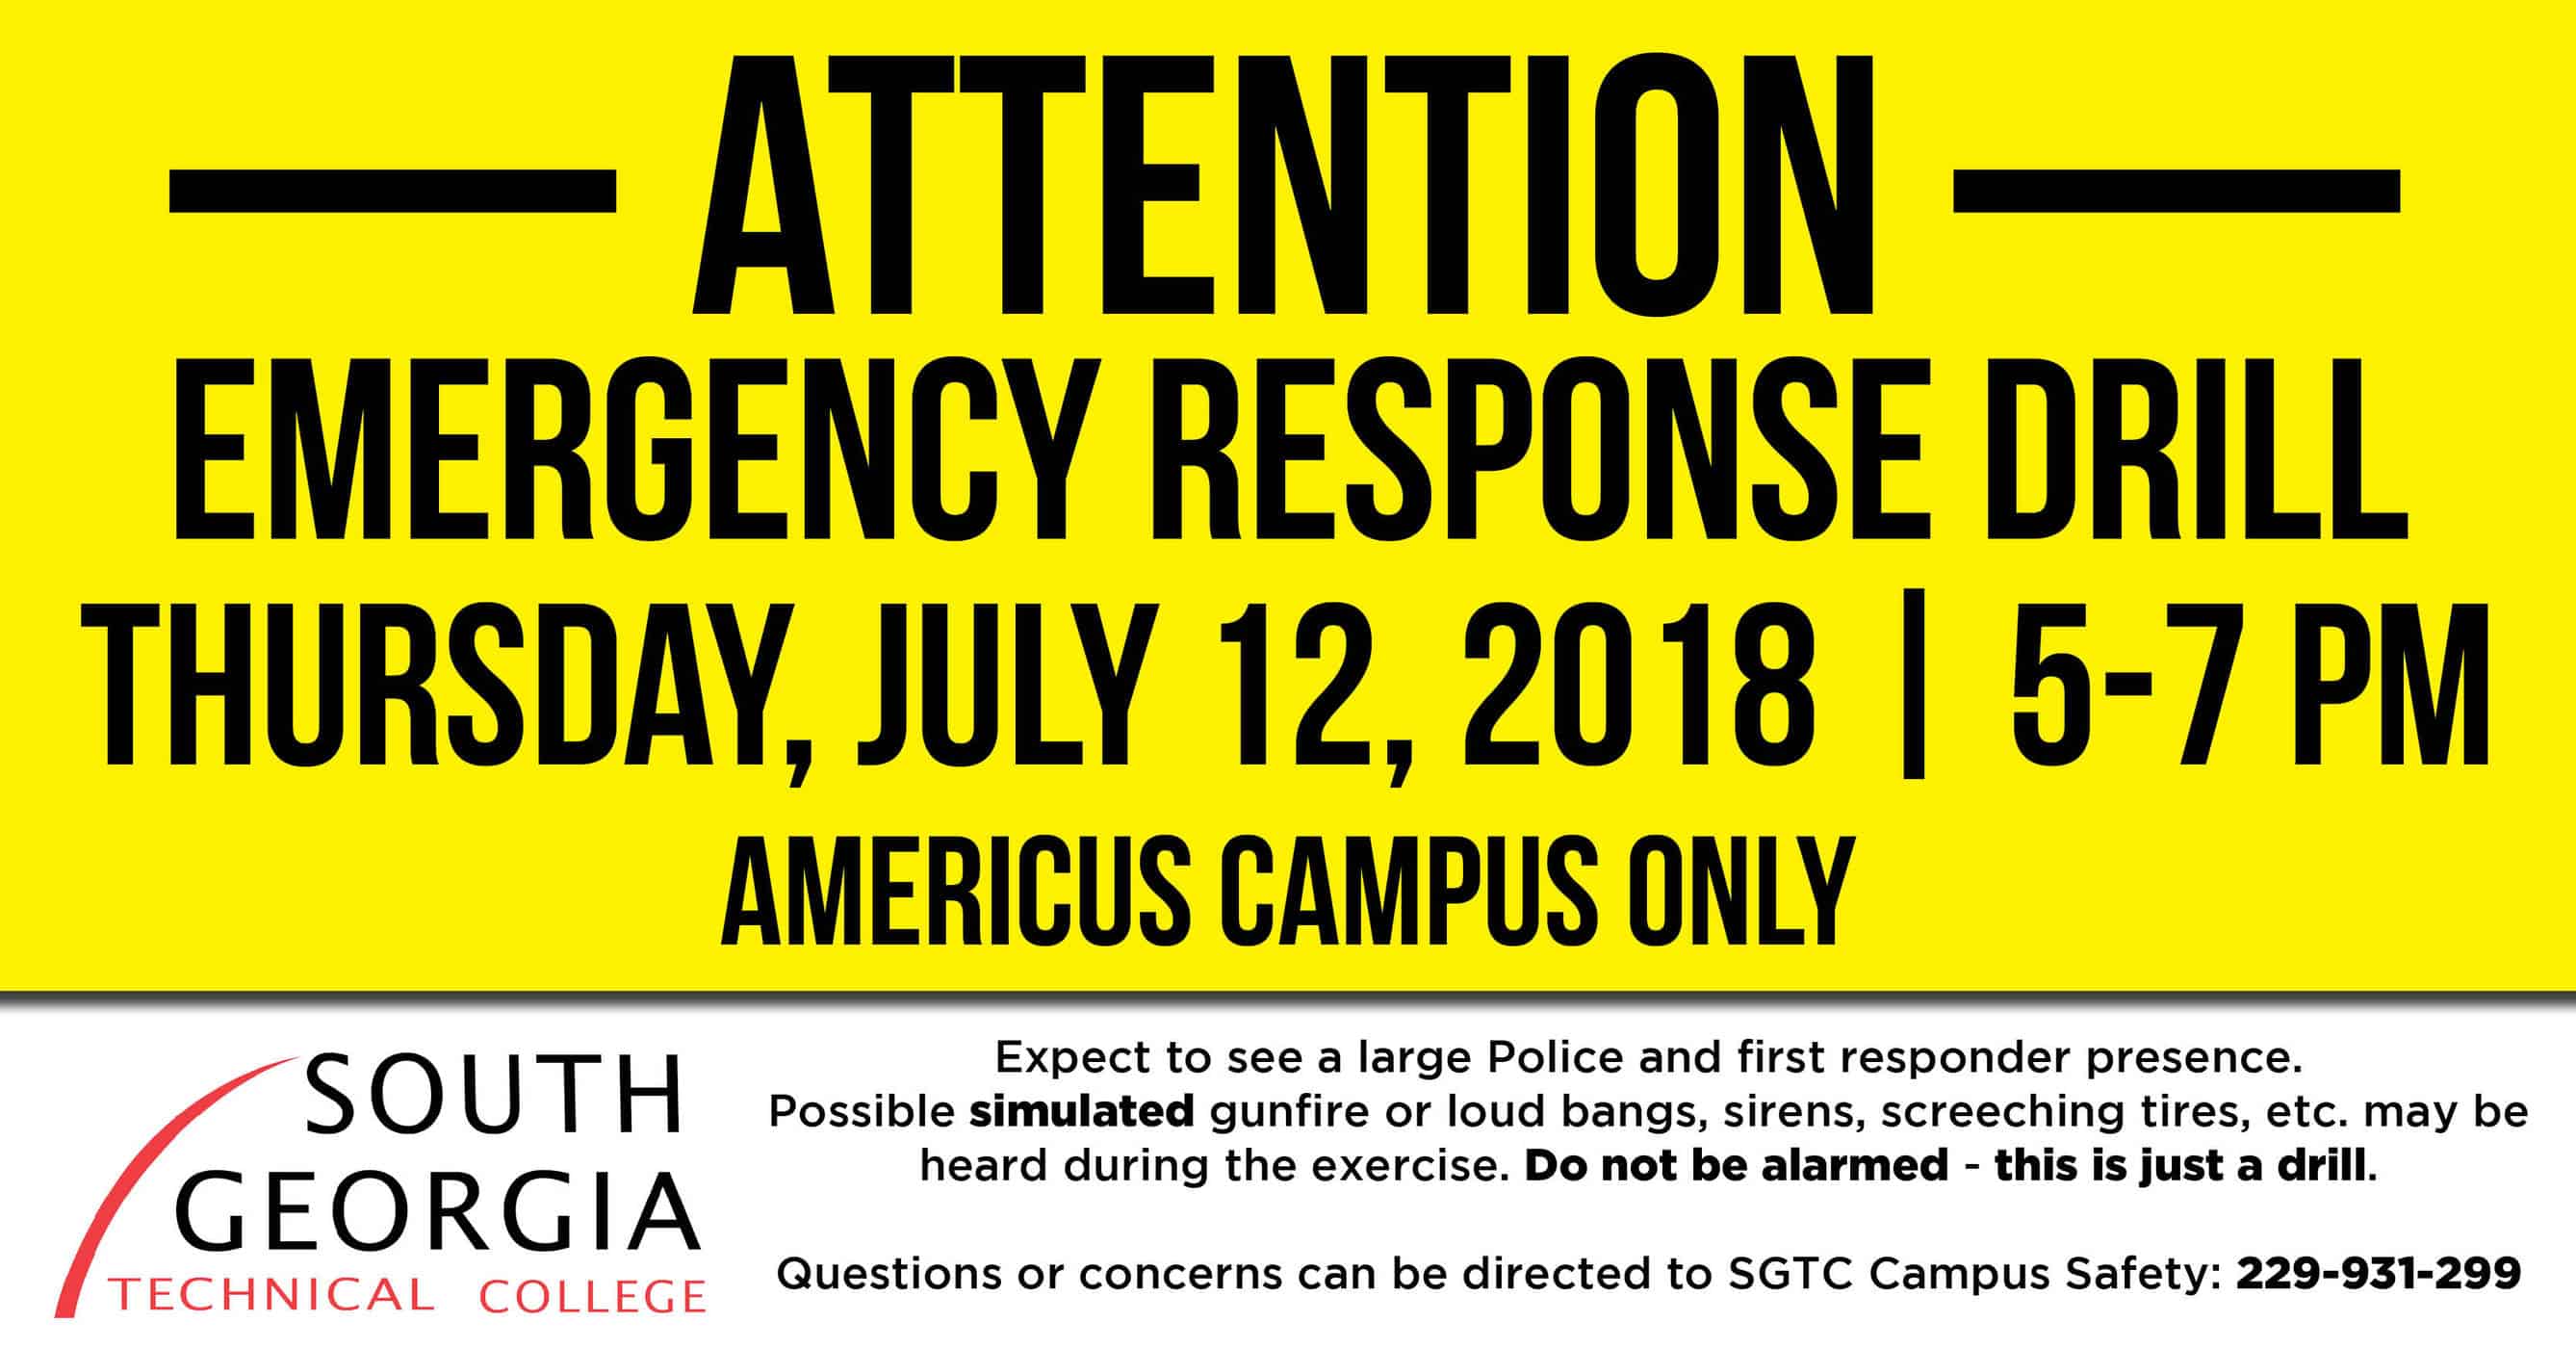 Image reads "Attention - emergency response drill - Thursday, July 12, 2018 - 5 to 7 PM."